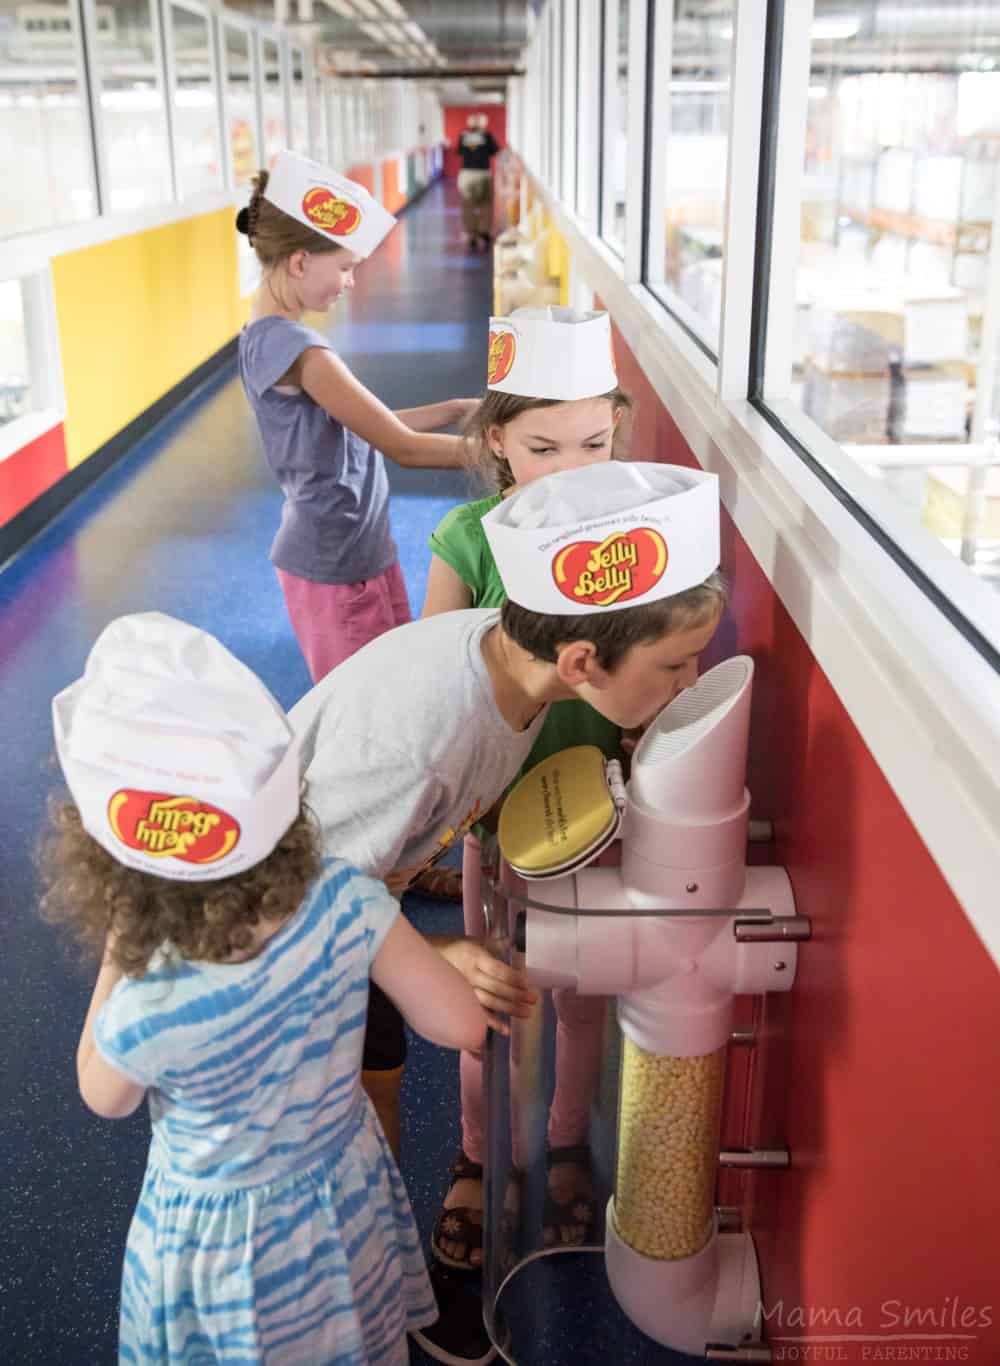 Guessing jelly bean flavors by smell at the Jelly Belly Factory tour